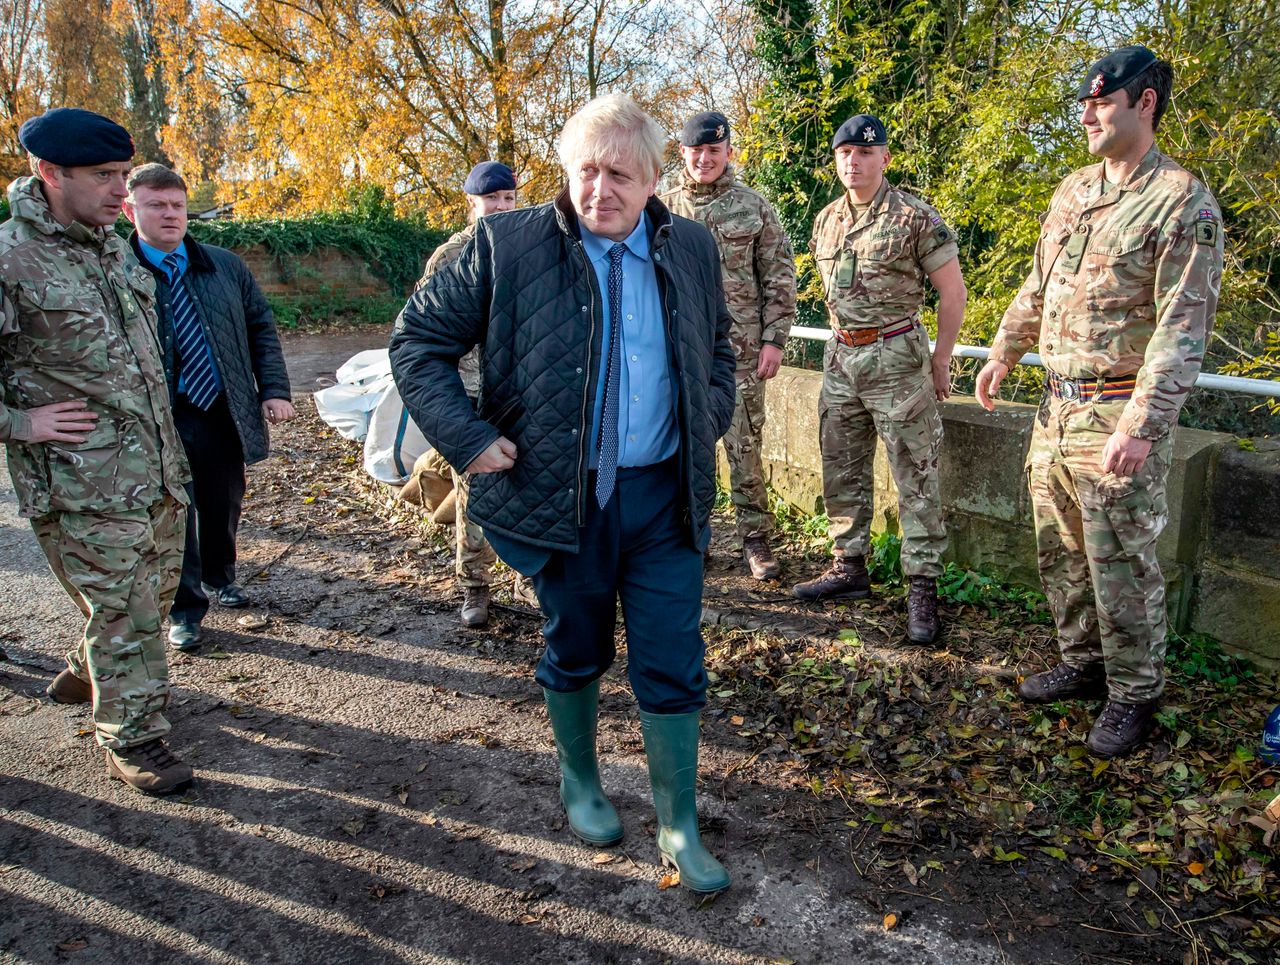 Britain's Prime Minister Boris Johnson walks past members of the Light Dragoons during a visit to Stainforth, near Doncaster, on Wednesday.